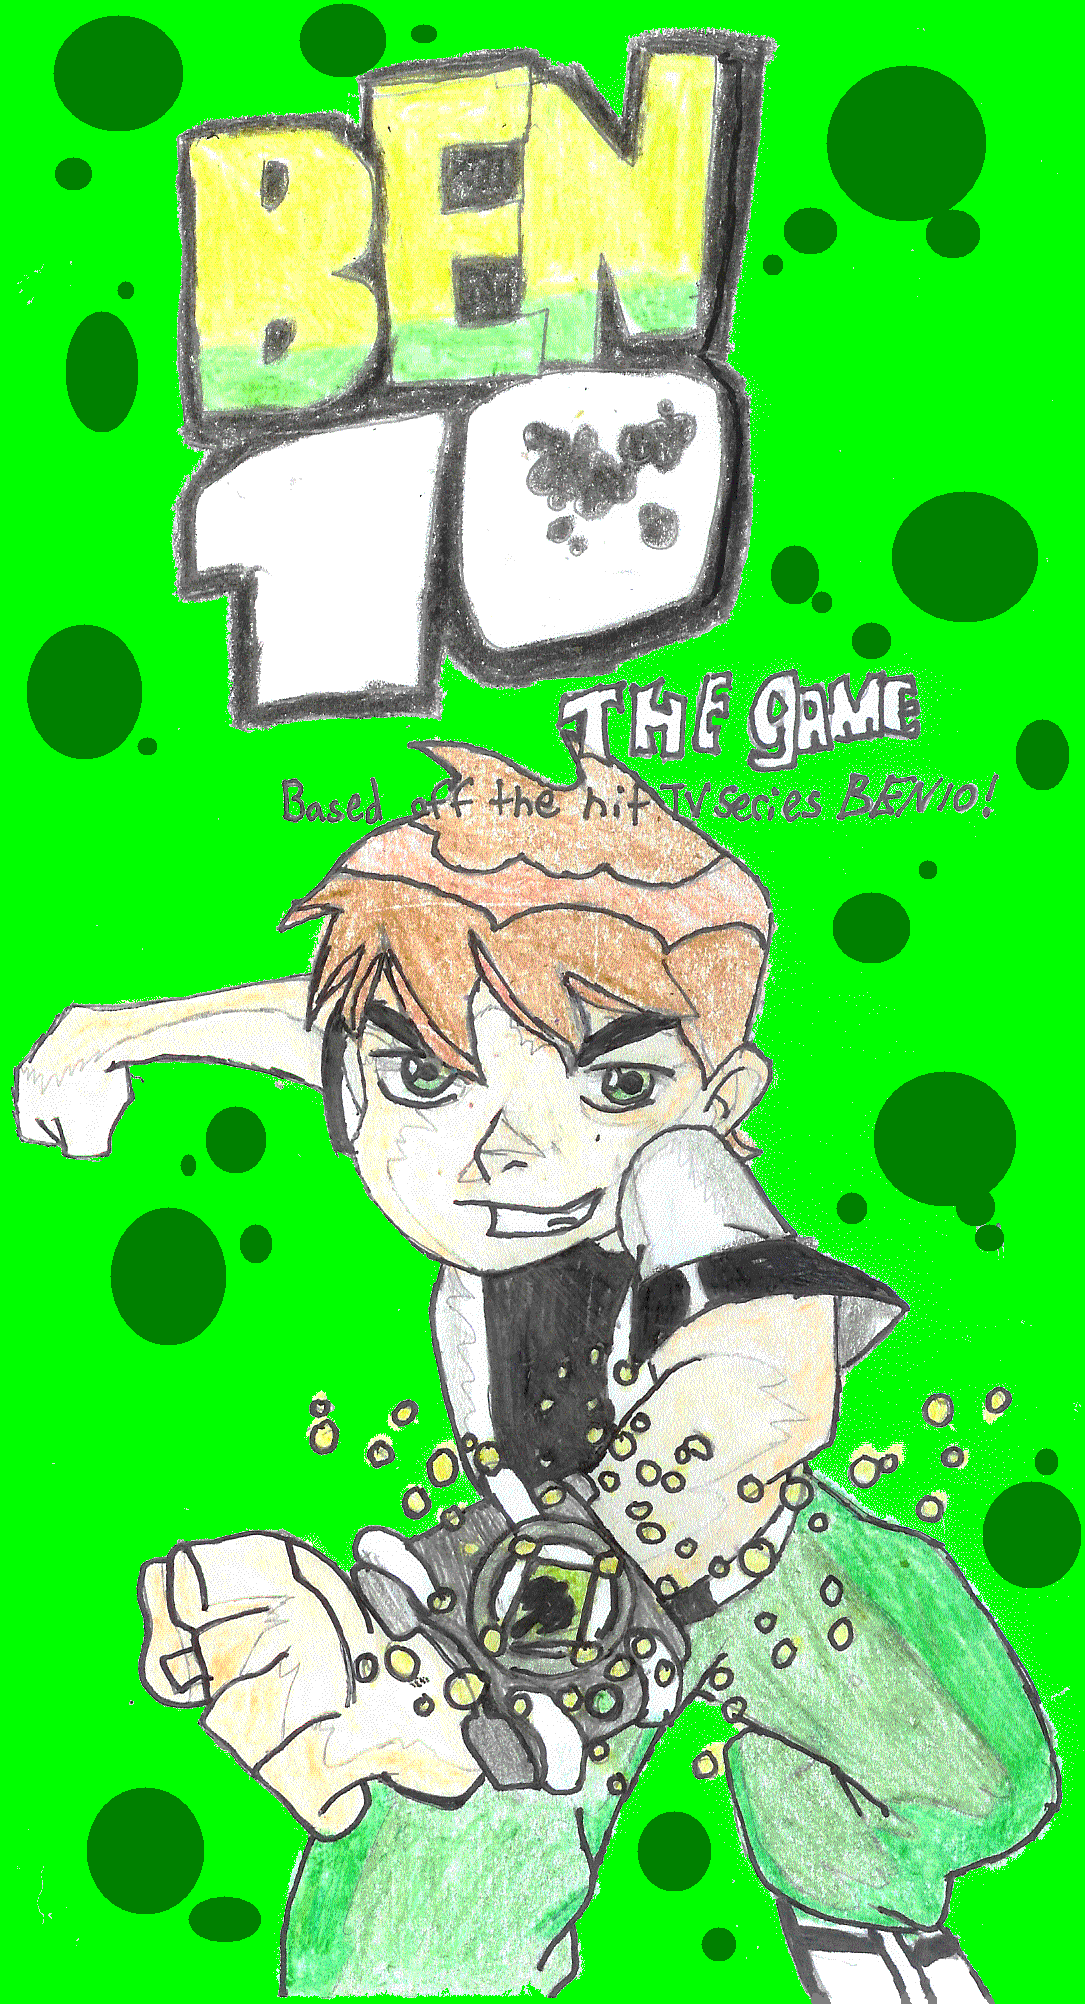 Ben 10 game cover by GhostFreak060